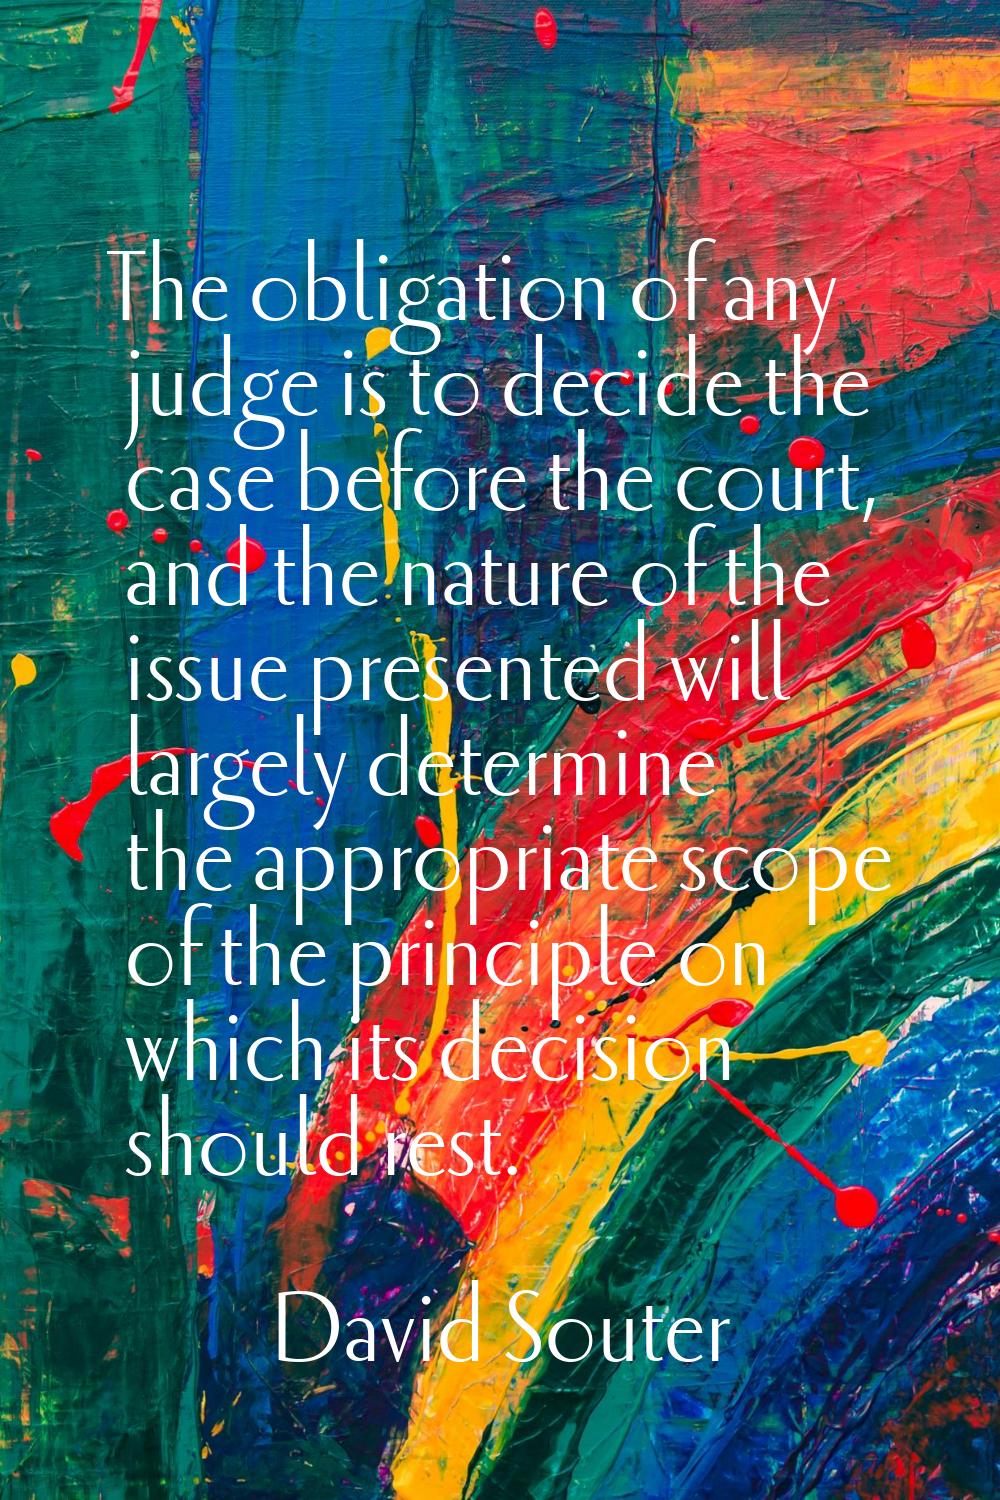 The obligation of any judge is to decide the case before the court, and the nature of the issue pre